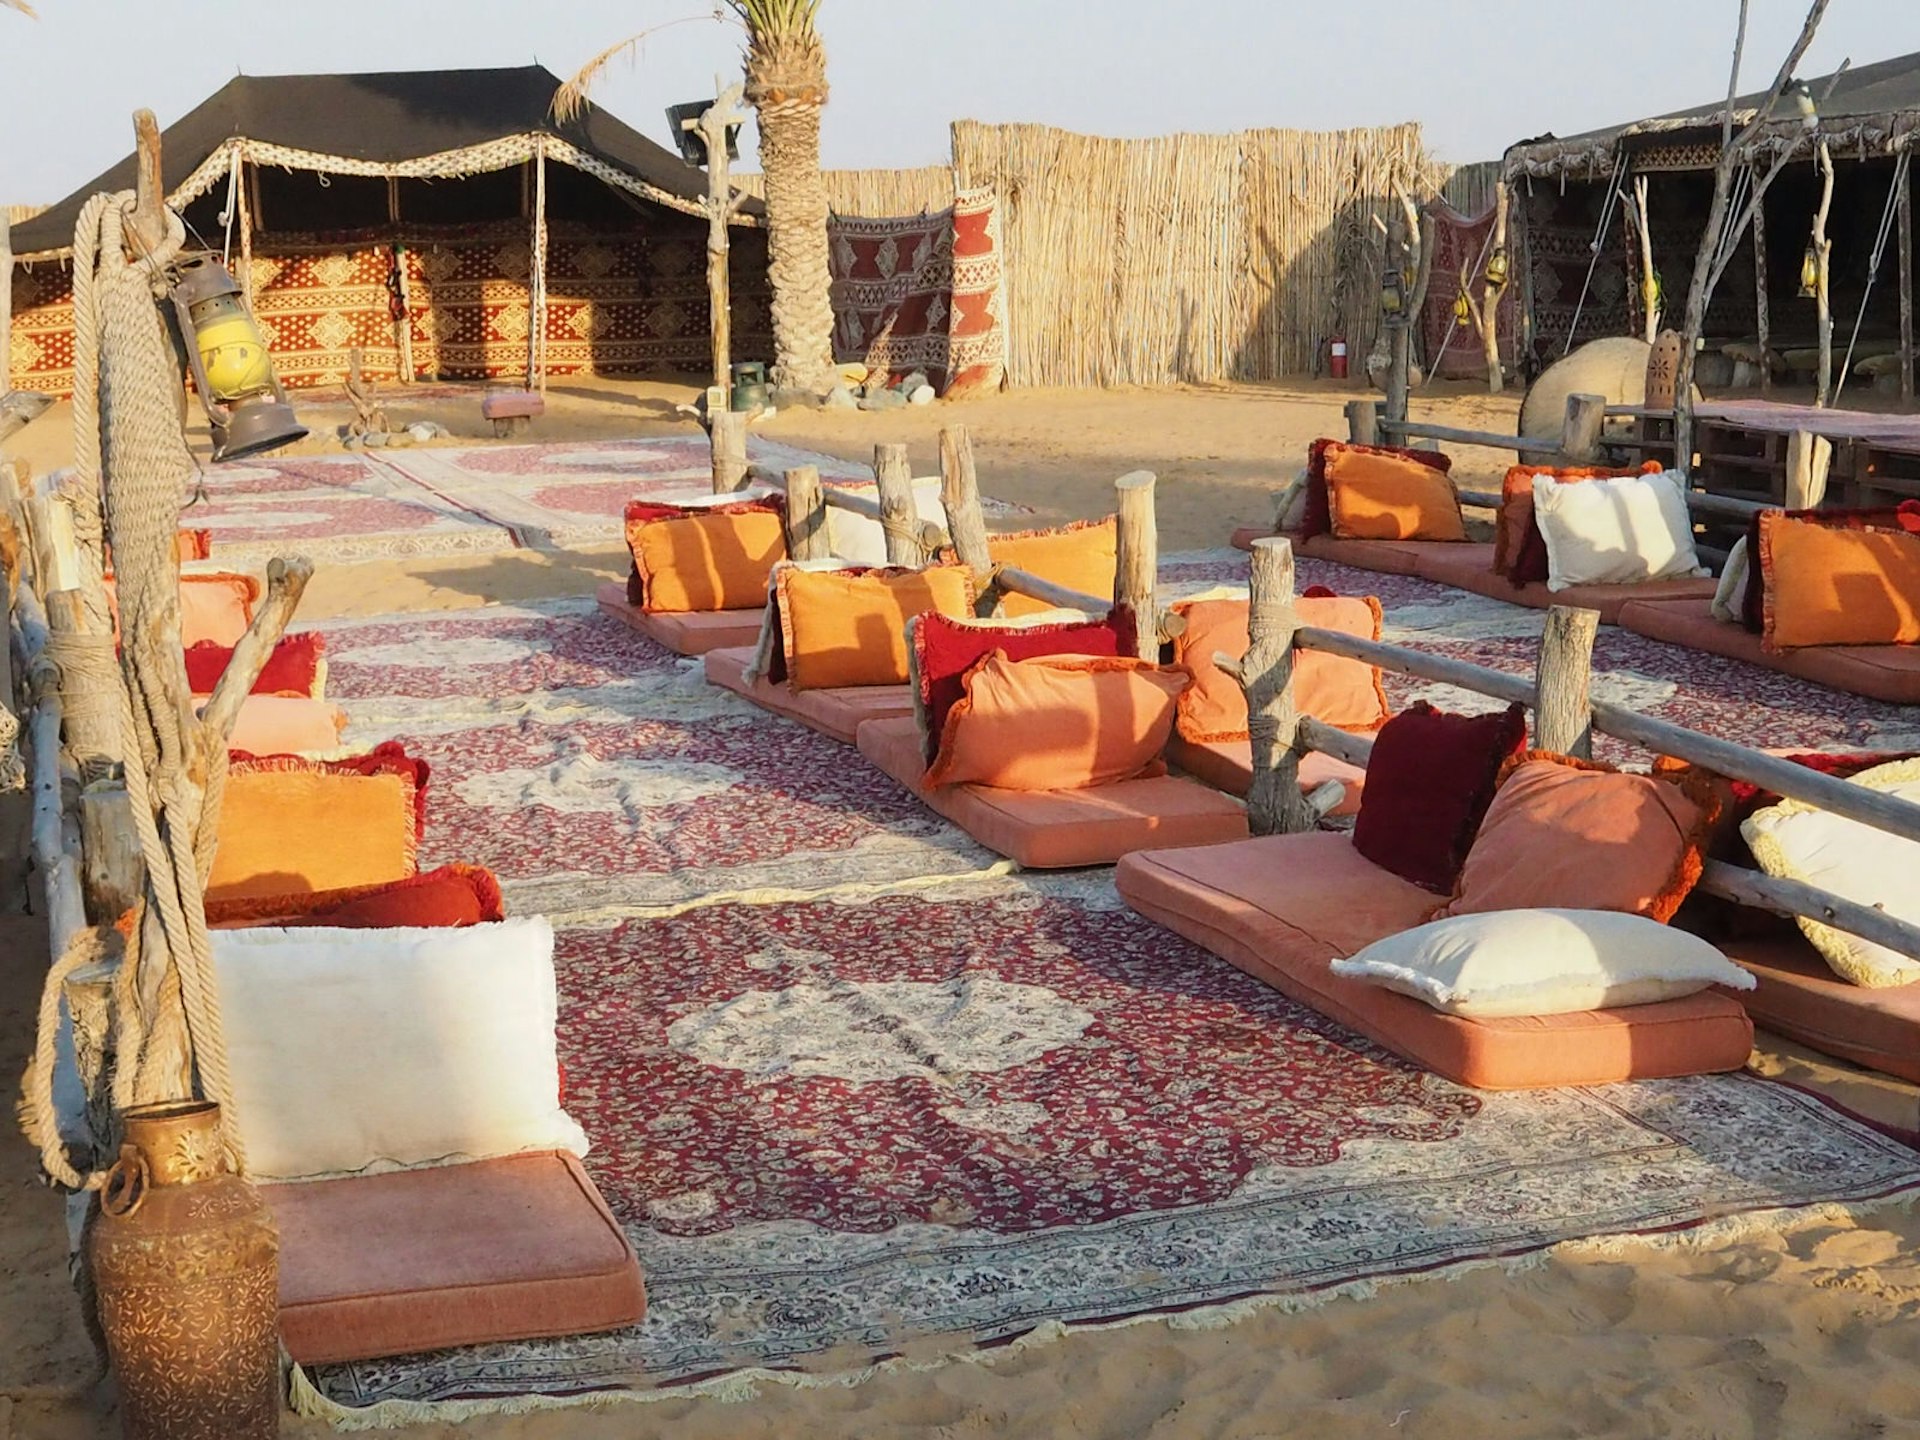 A camp is set up in the desert in Dubai, with patterned red-and-white carpet and low, cushioned seats set up on the sand. 